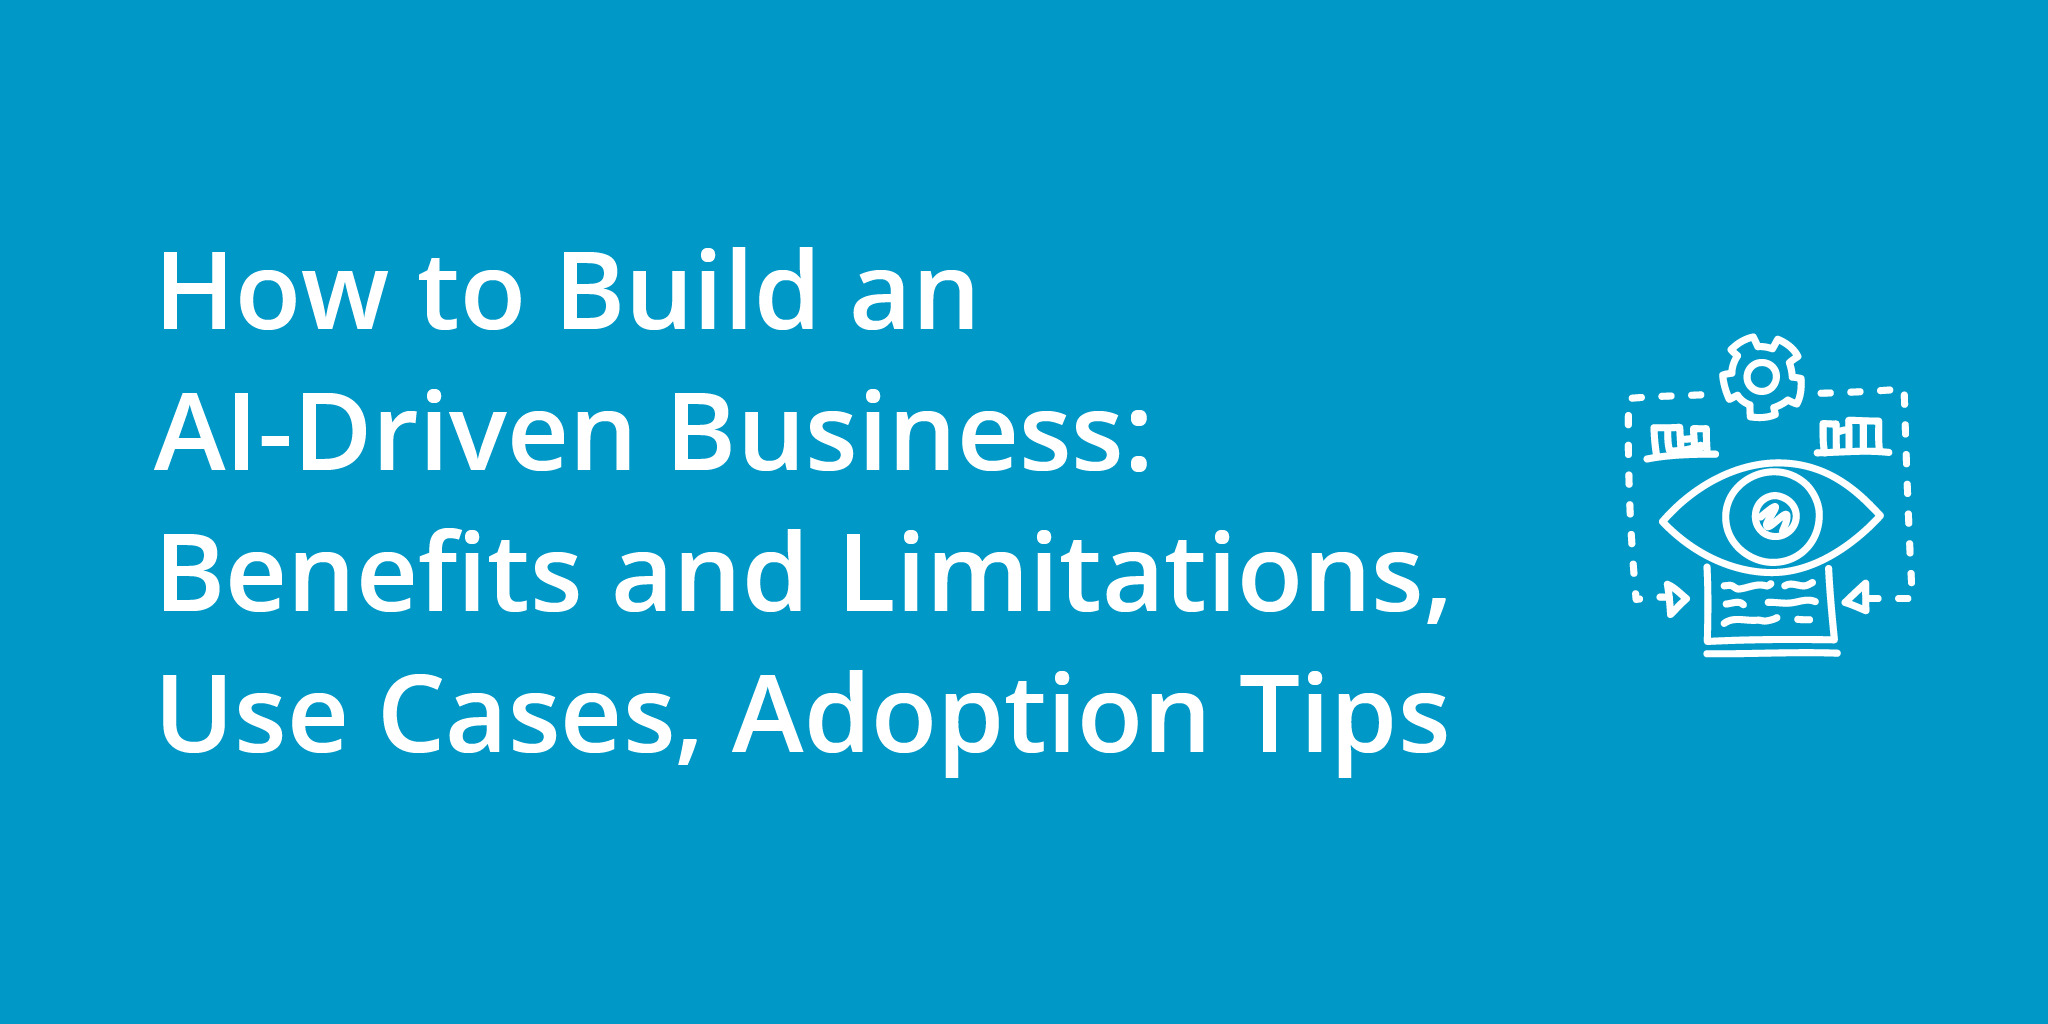 How to Build an AI-Driven Business: Benefits and Limitations, Use Cases, Adoption Tips 